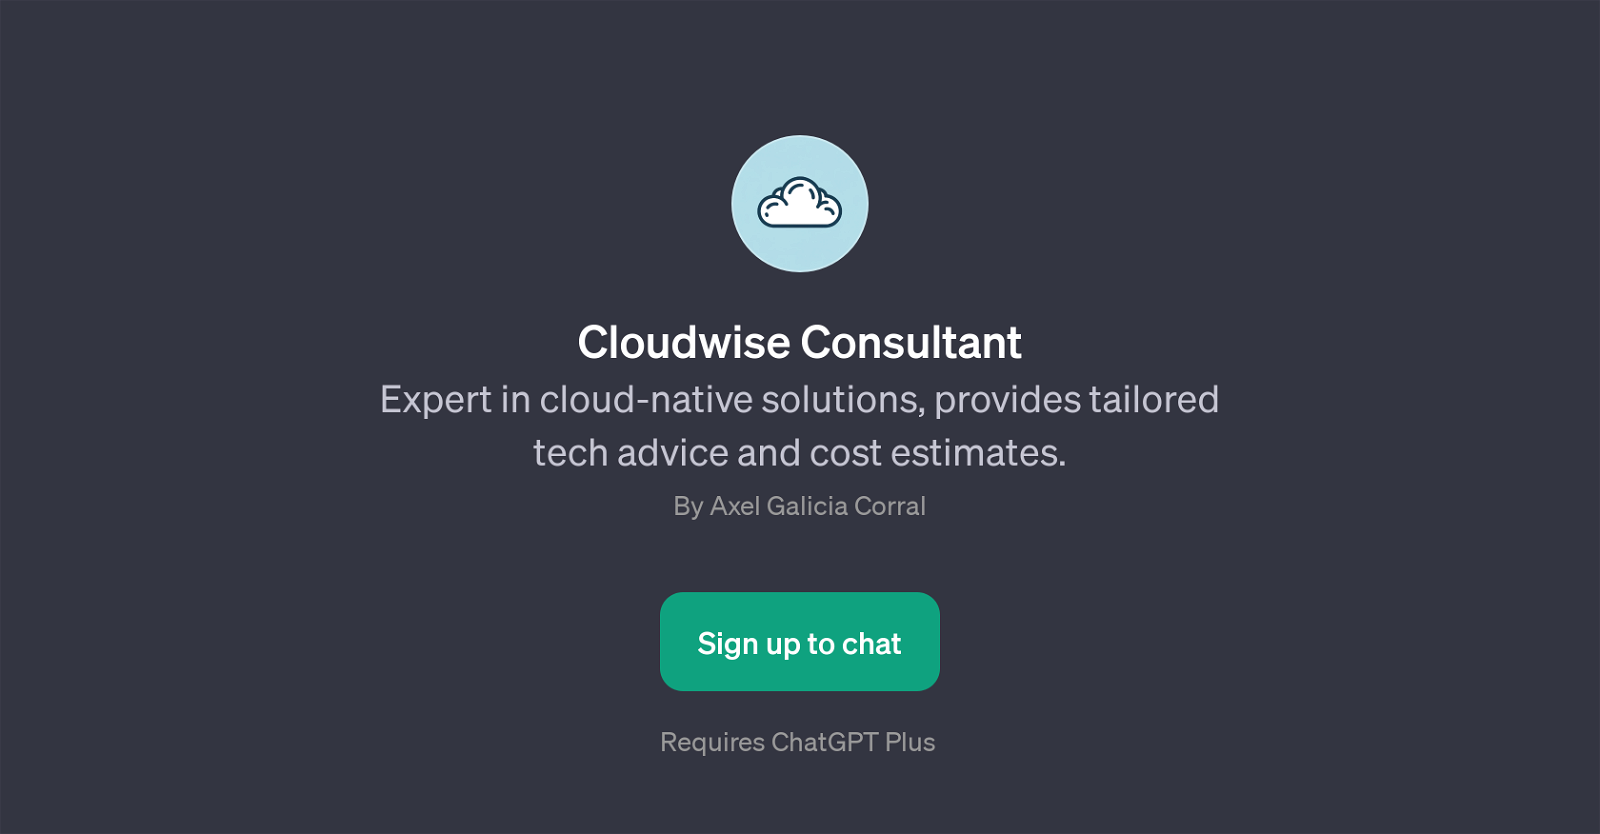 Cloudwise Consultant website